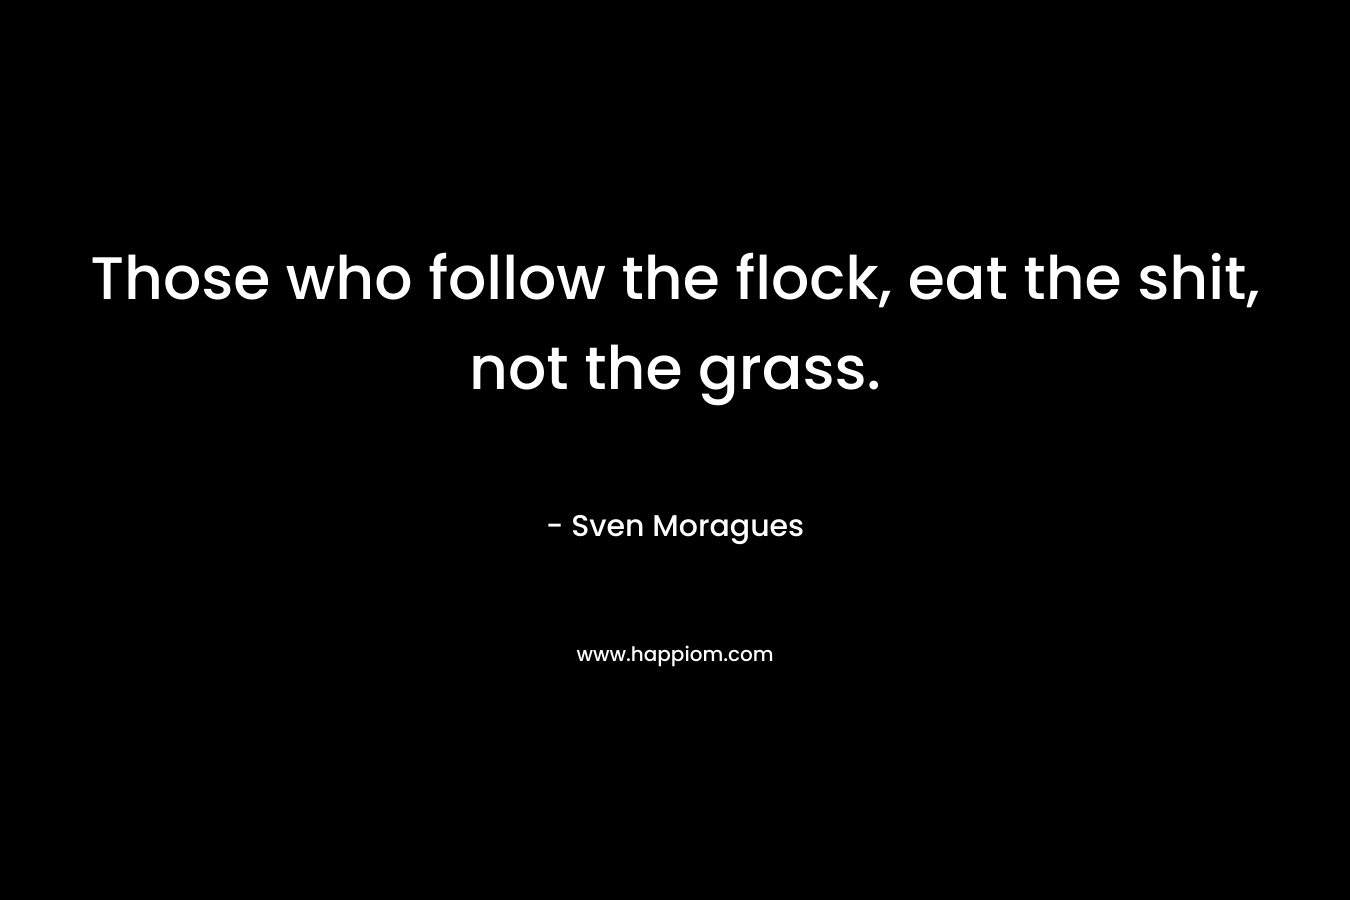 Those who follow the flock, eat the shit, not the grass. – Sven Moragues